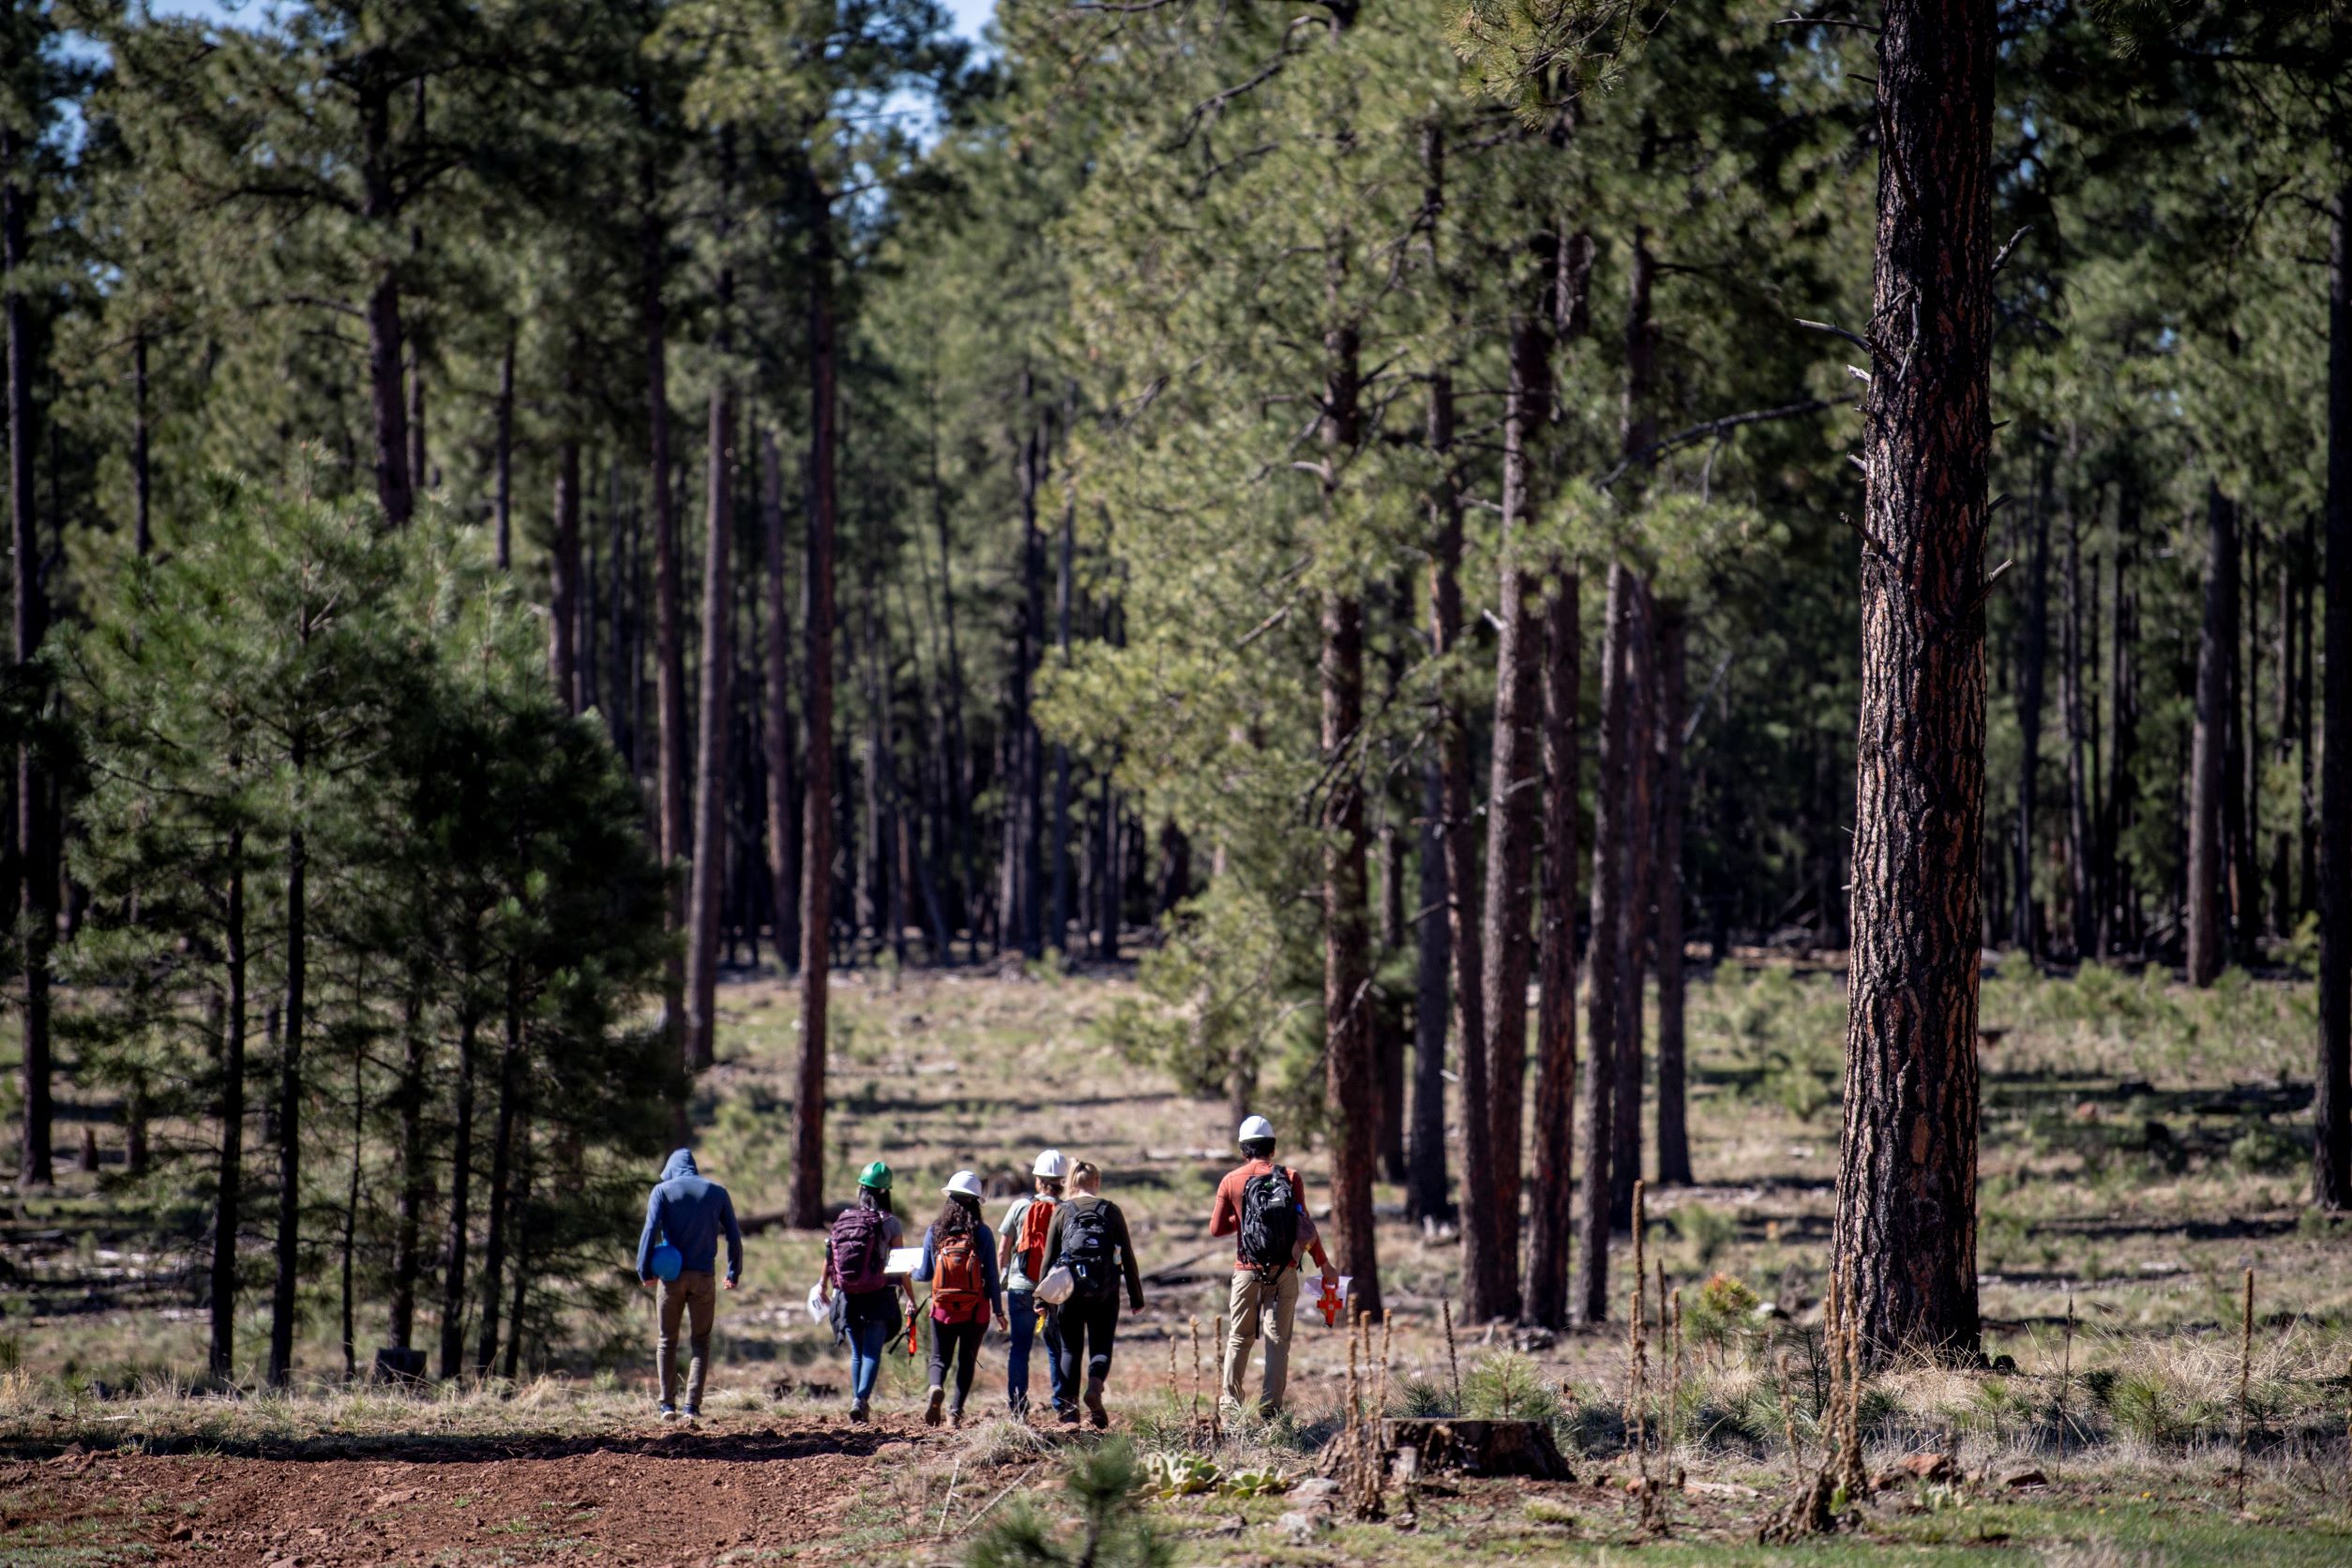 Group of student walking into the forest with trees on both sides